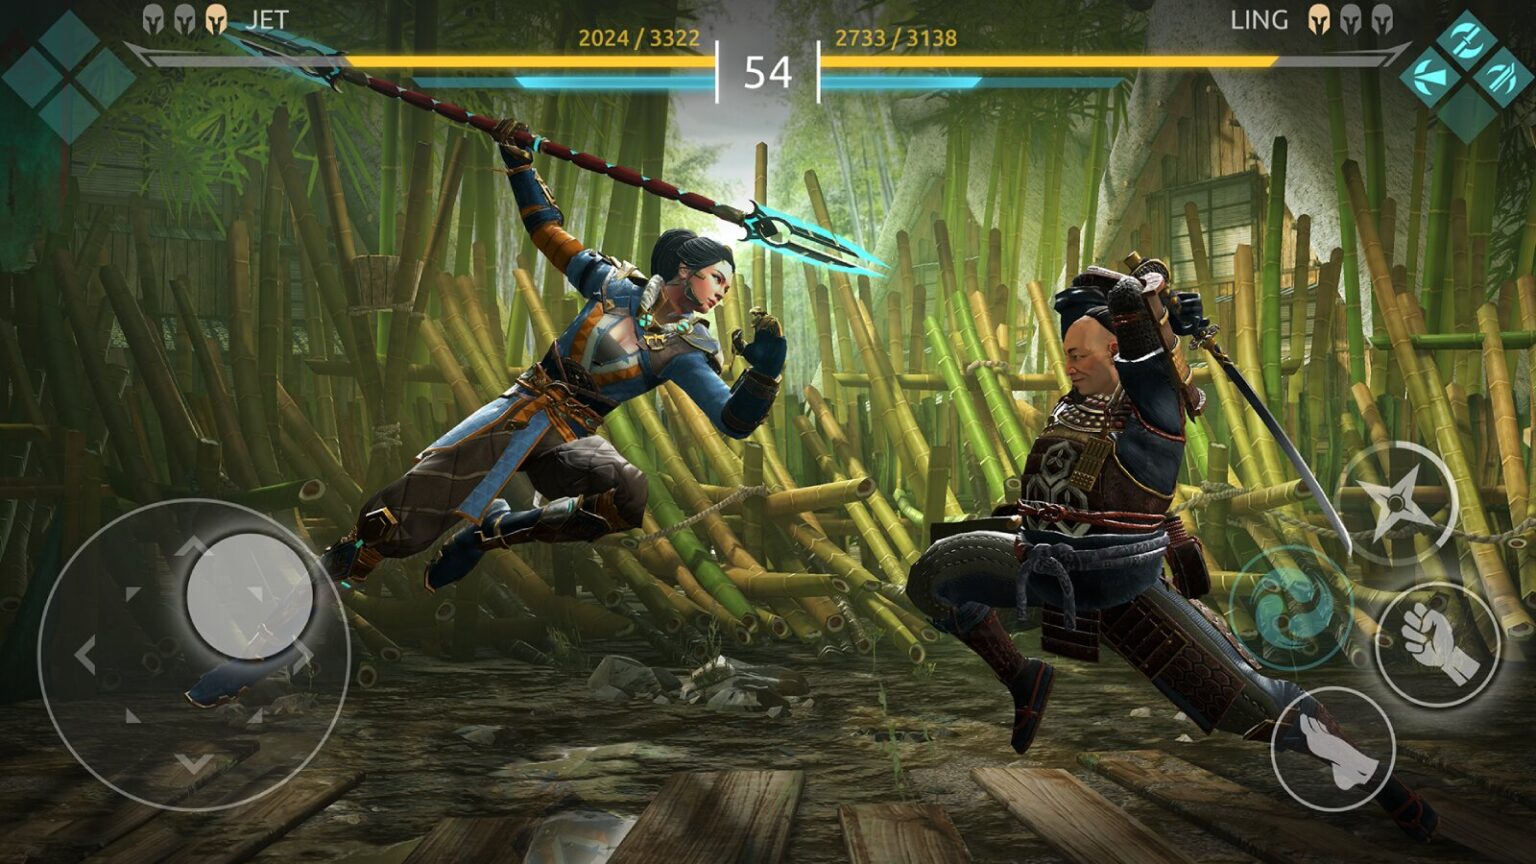 Two characters dueling in a best action mobile game